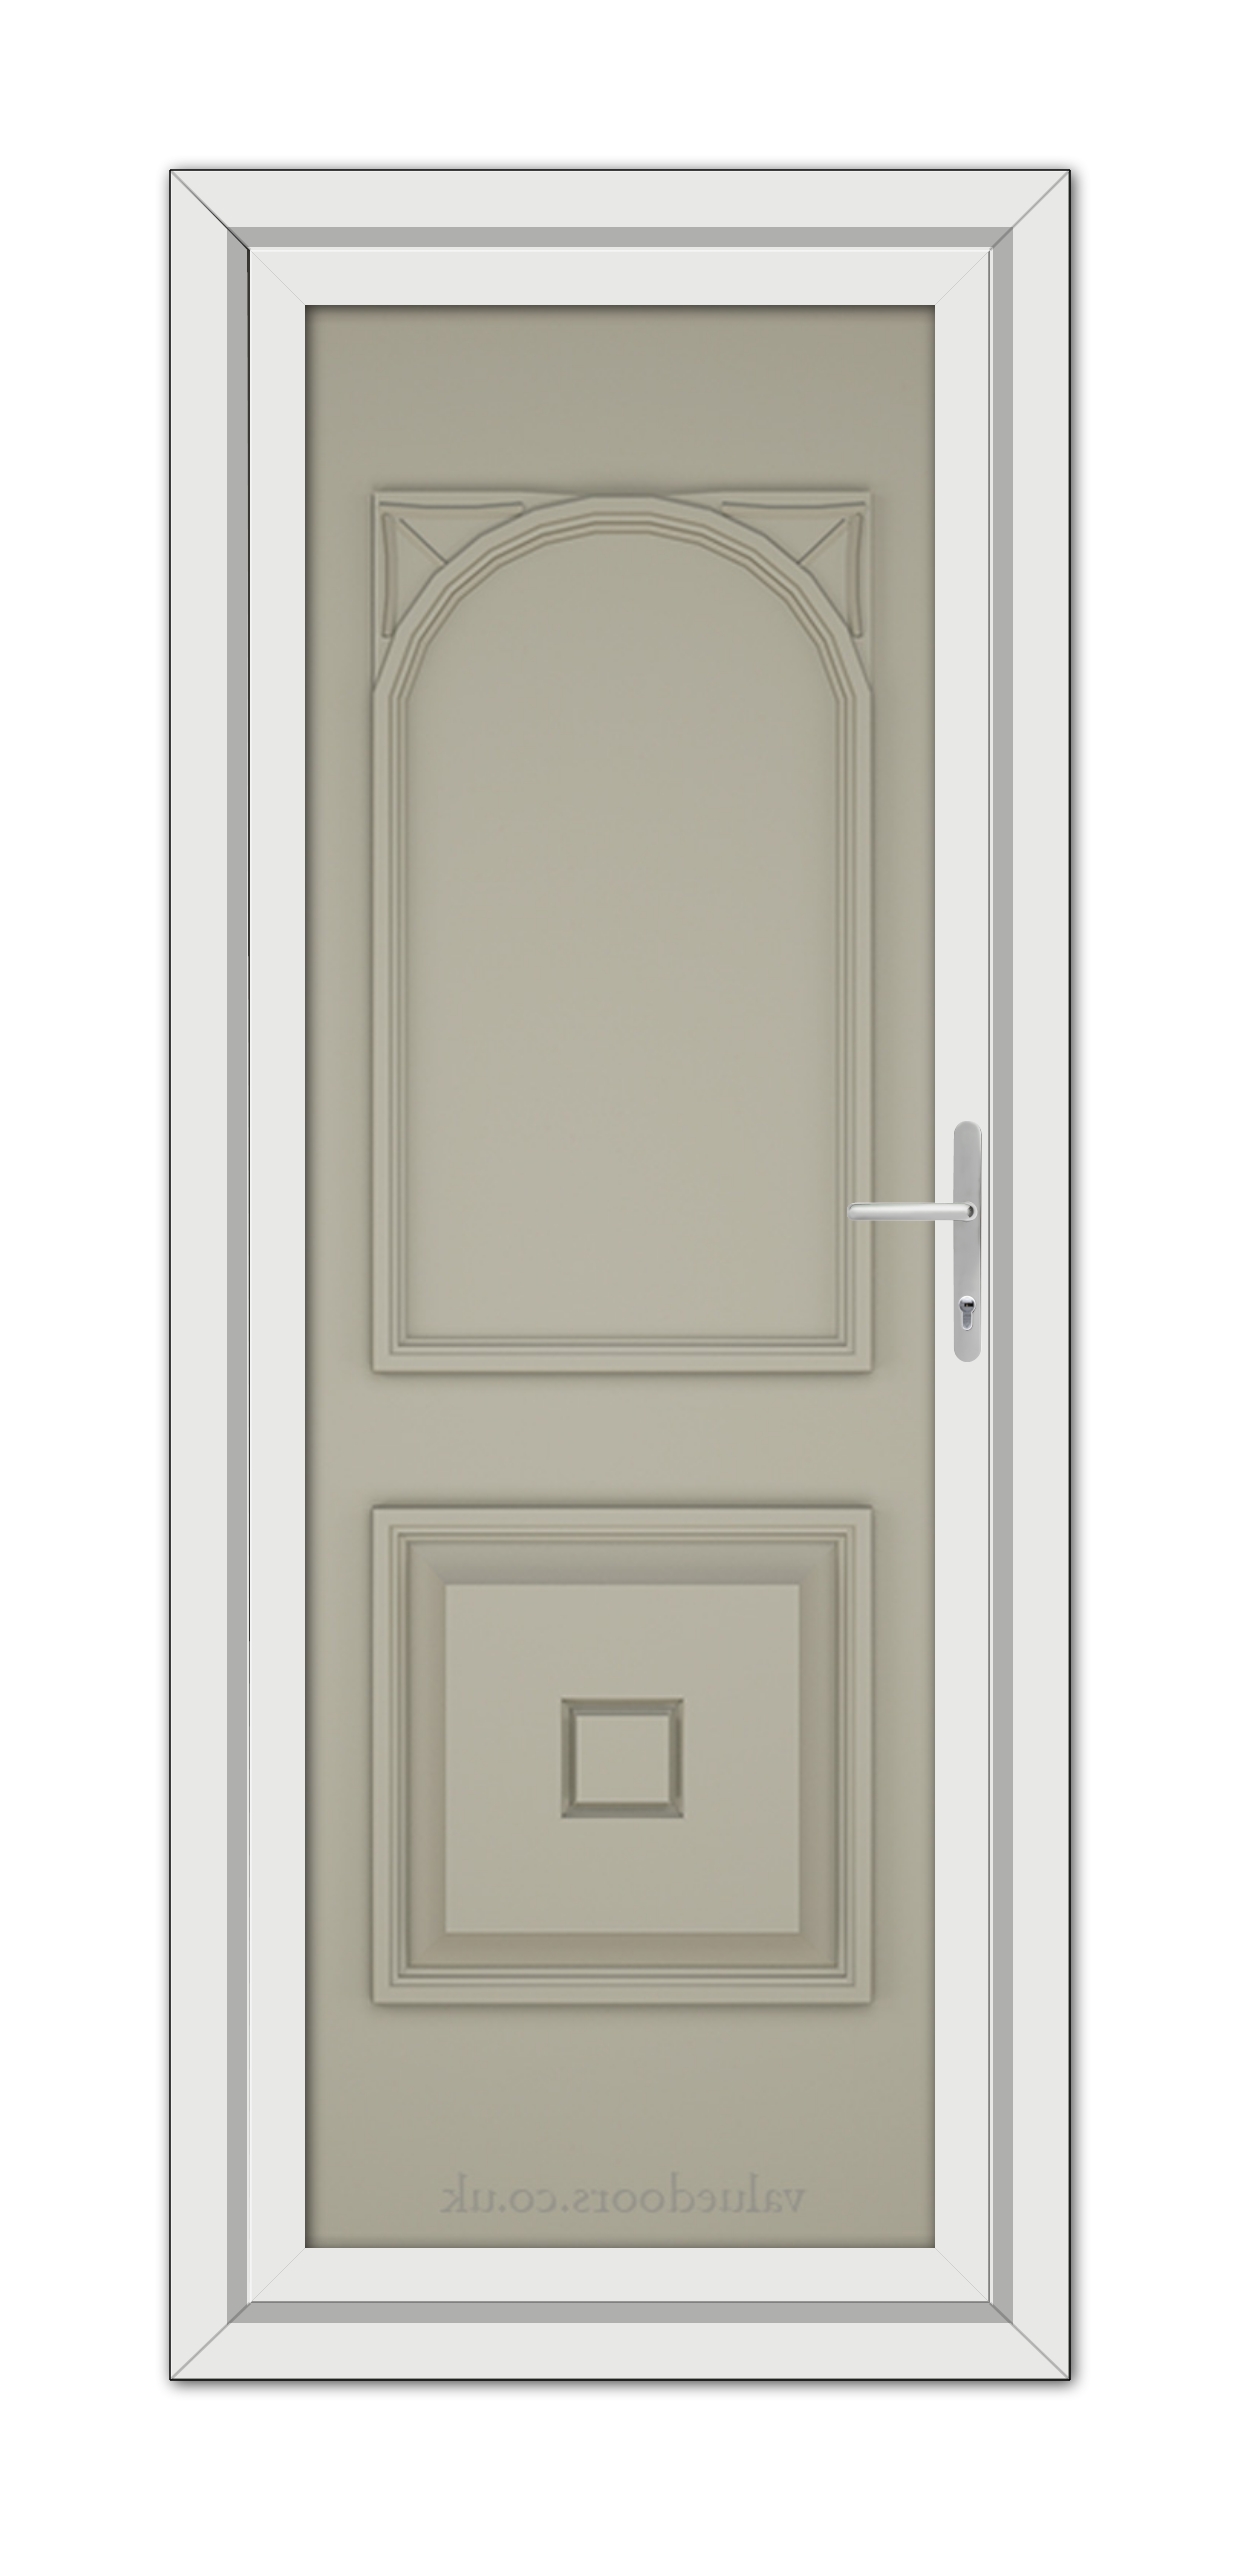 The Pebble Grey Reims Solid uPVC Door is an upright, closed, single-panel door with an arched top and a small rectangular relief at the bottom, set in a white frame with a modern handle on the right.